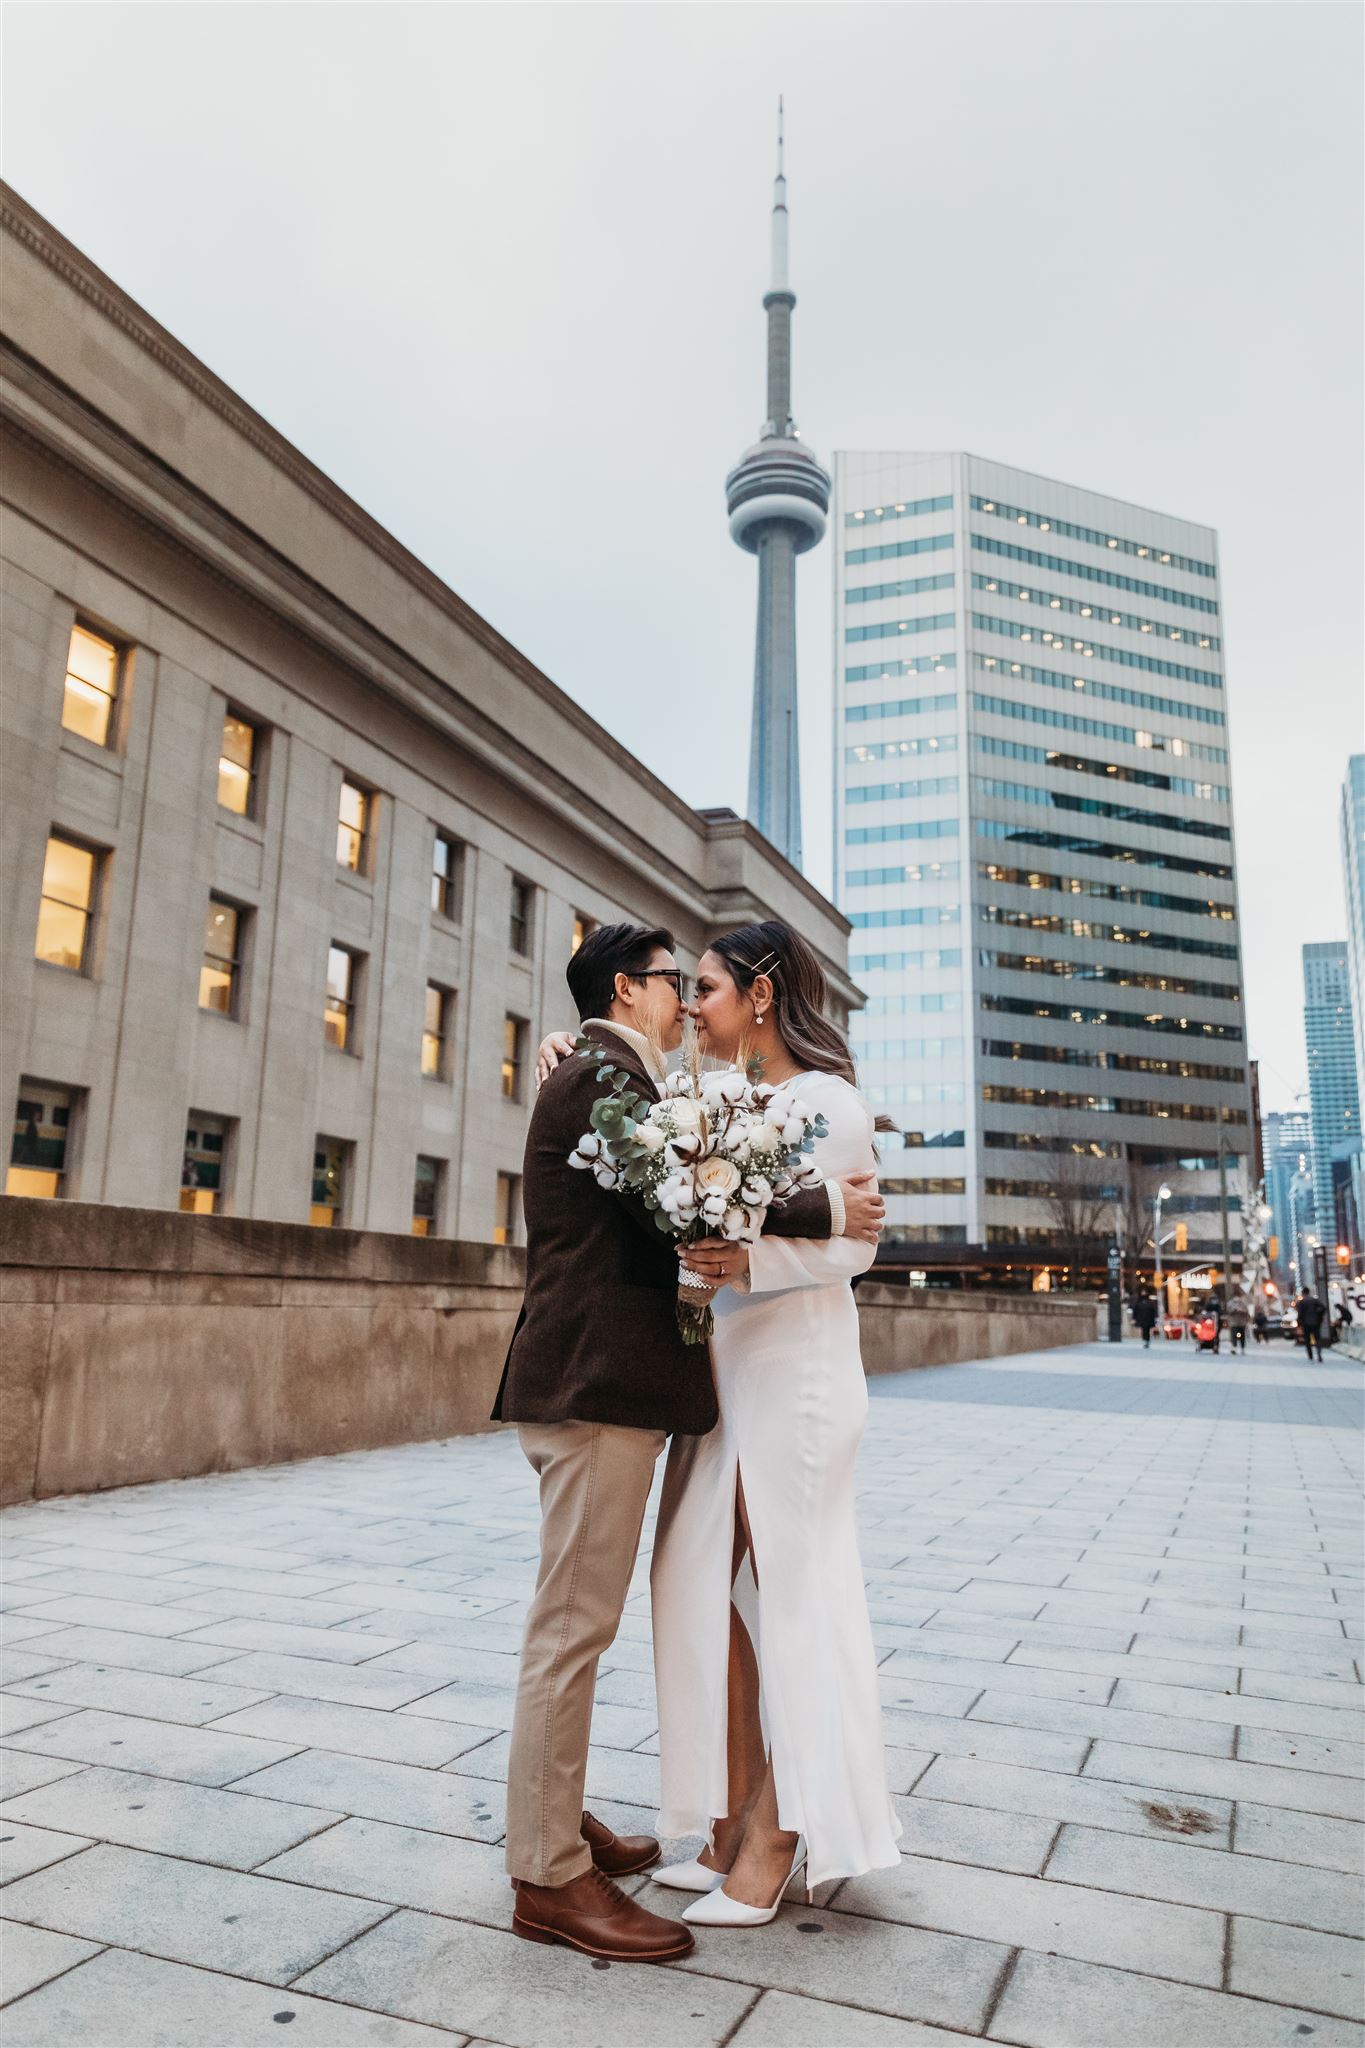 photography locations in toronto, union station engagement photos, union station wedding photos